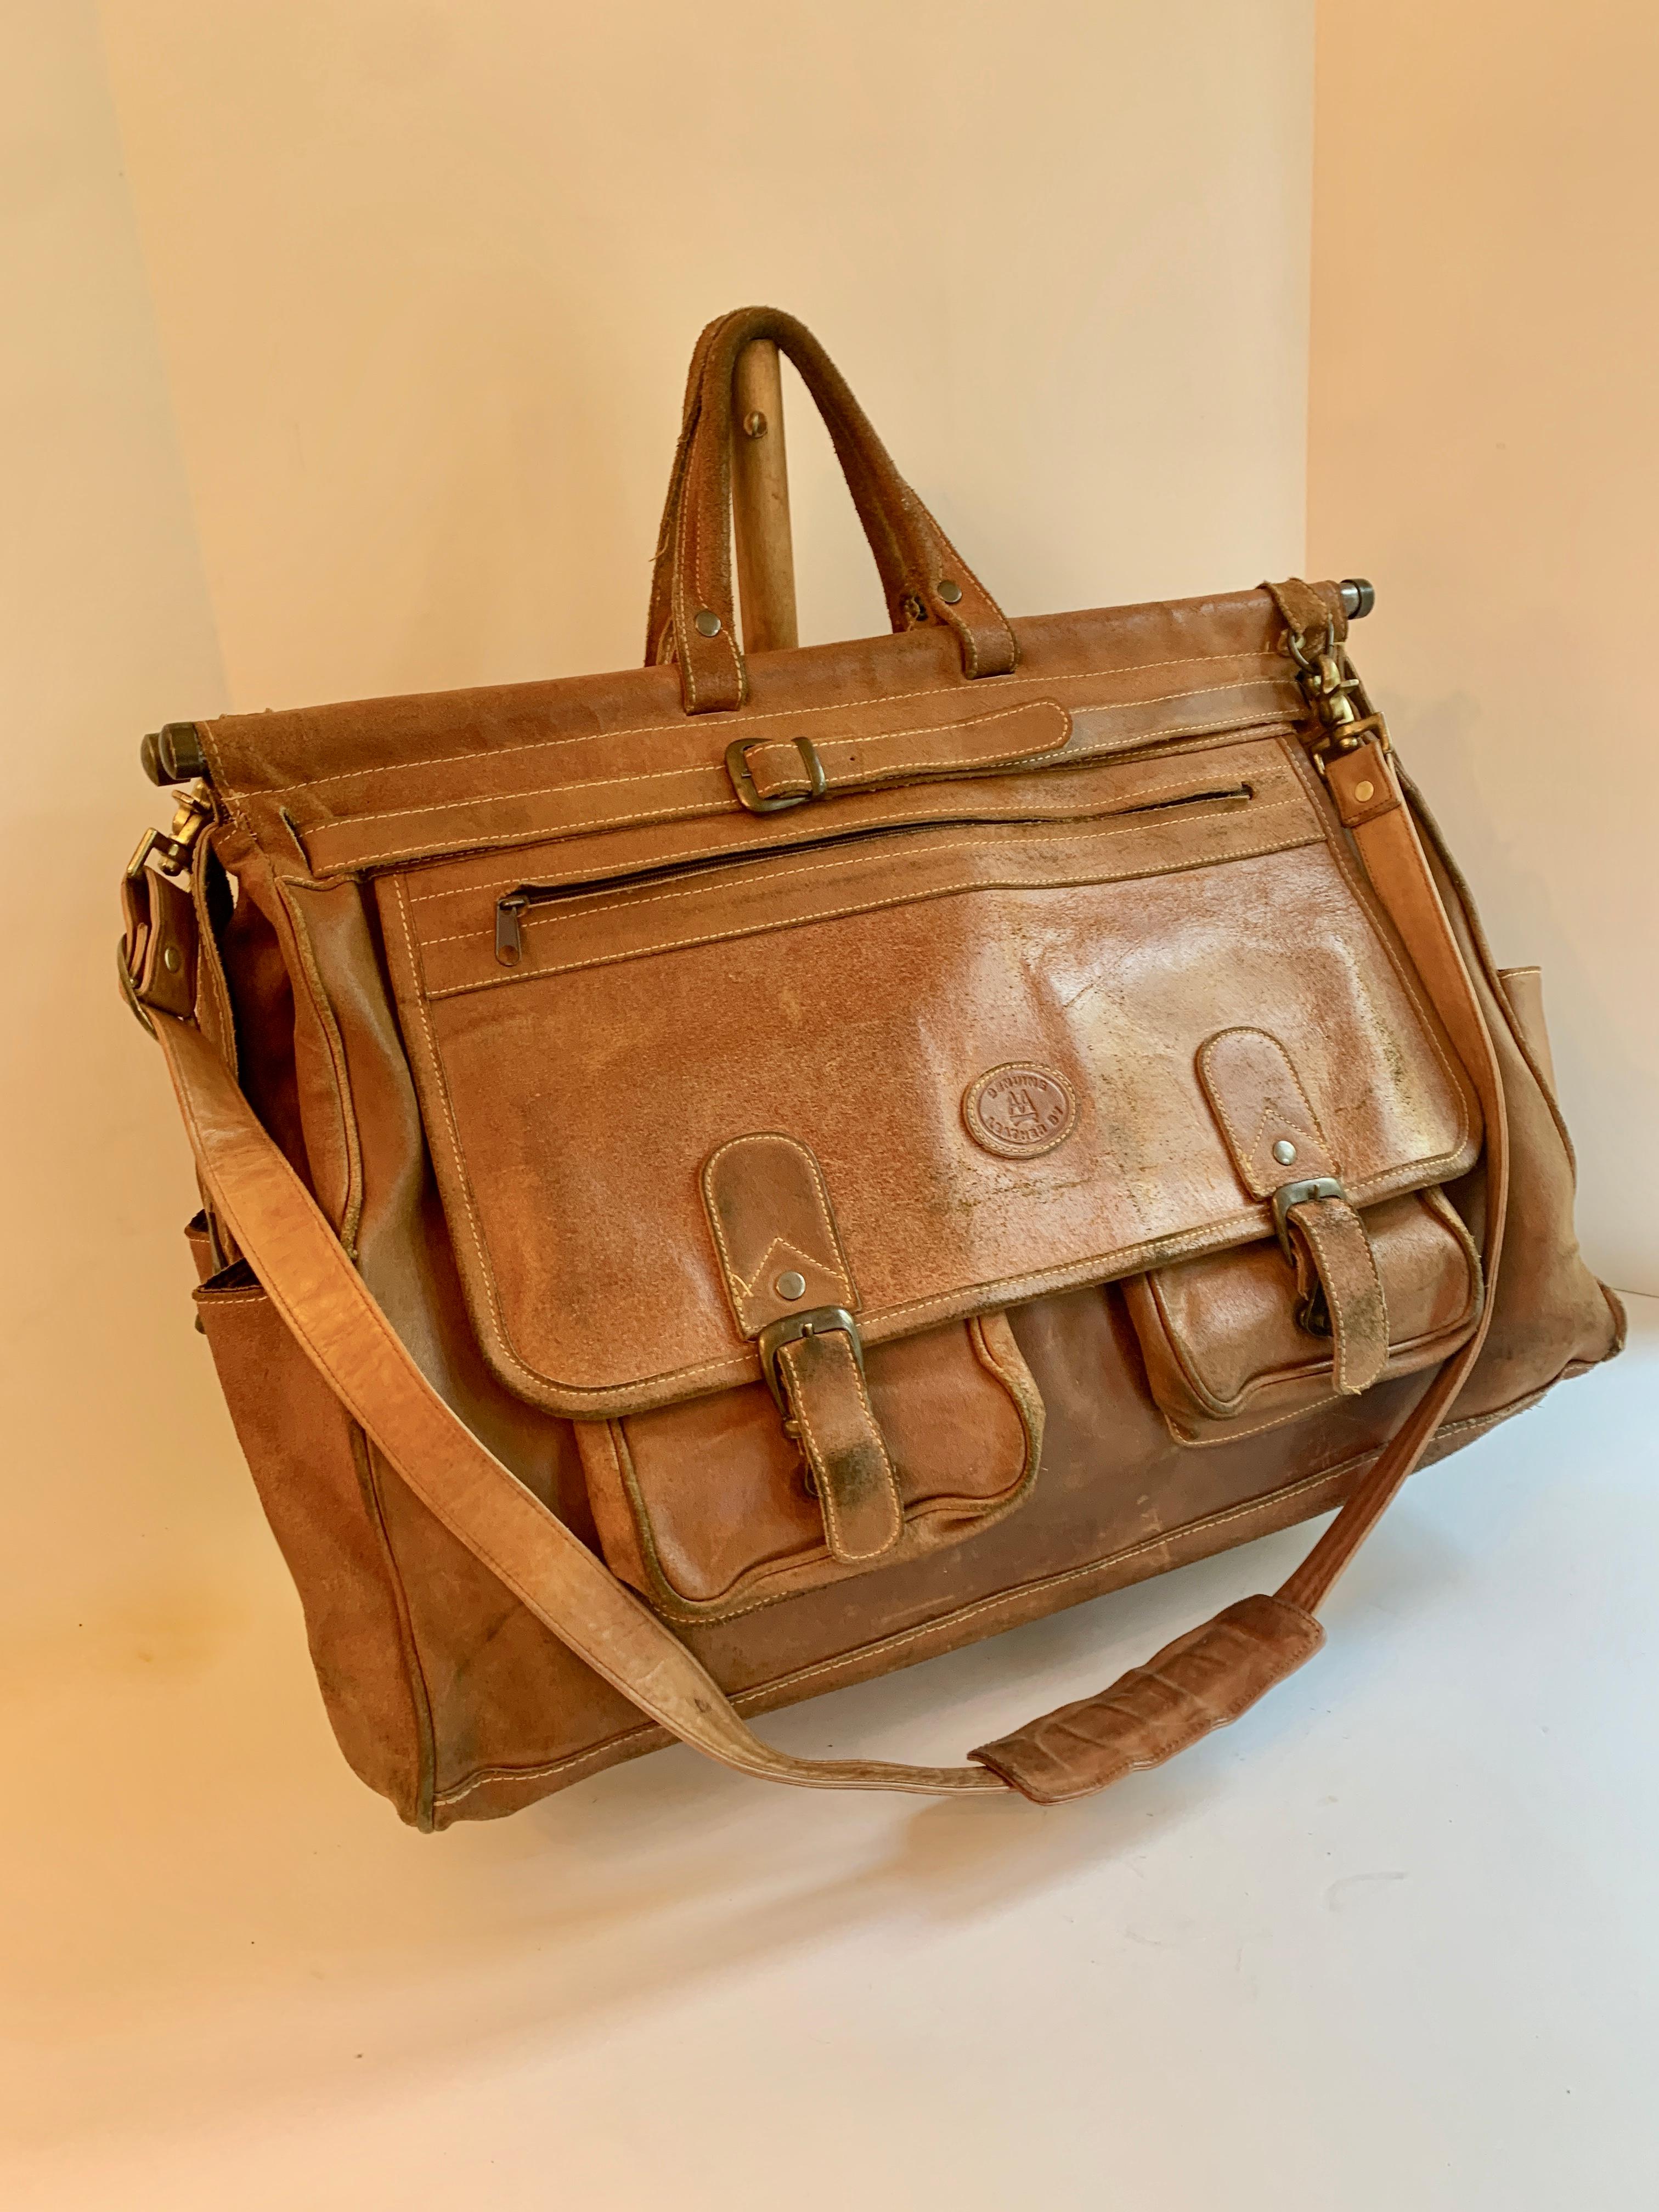 A wonderful duffle bag and perfect for weekend Getaway - luggage with many compartments and shoulder strap. The studs and supports are of brass, sturdy and decorative. The piece has side pockets as well as a zipper on the outside and under flap is a